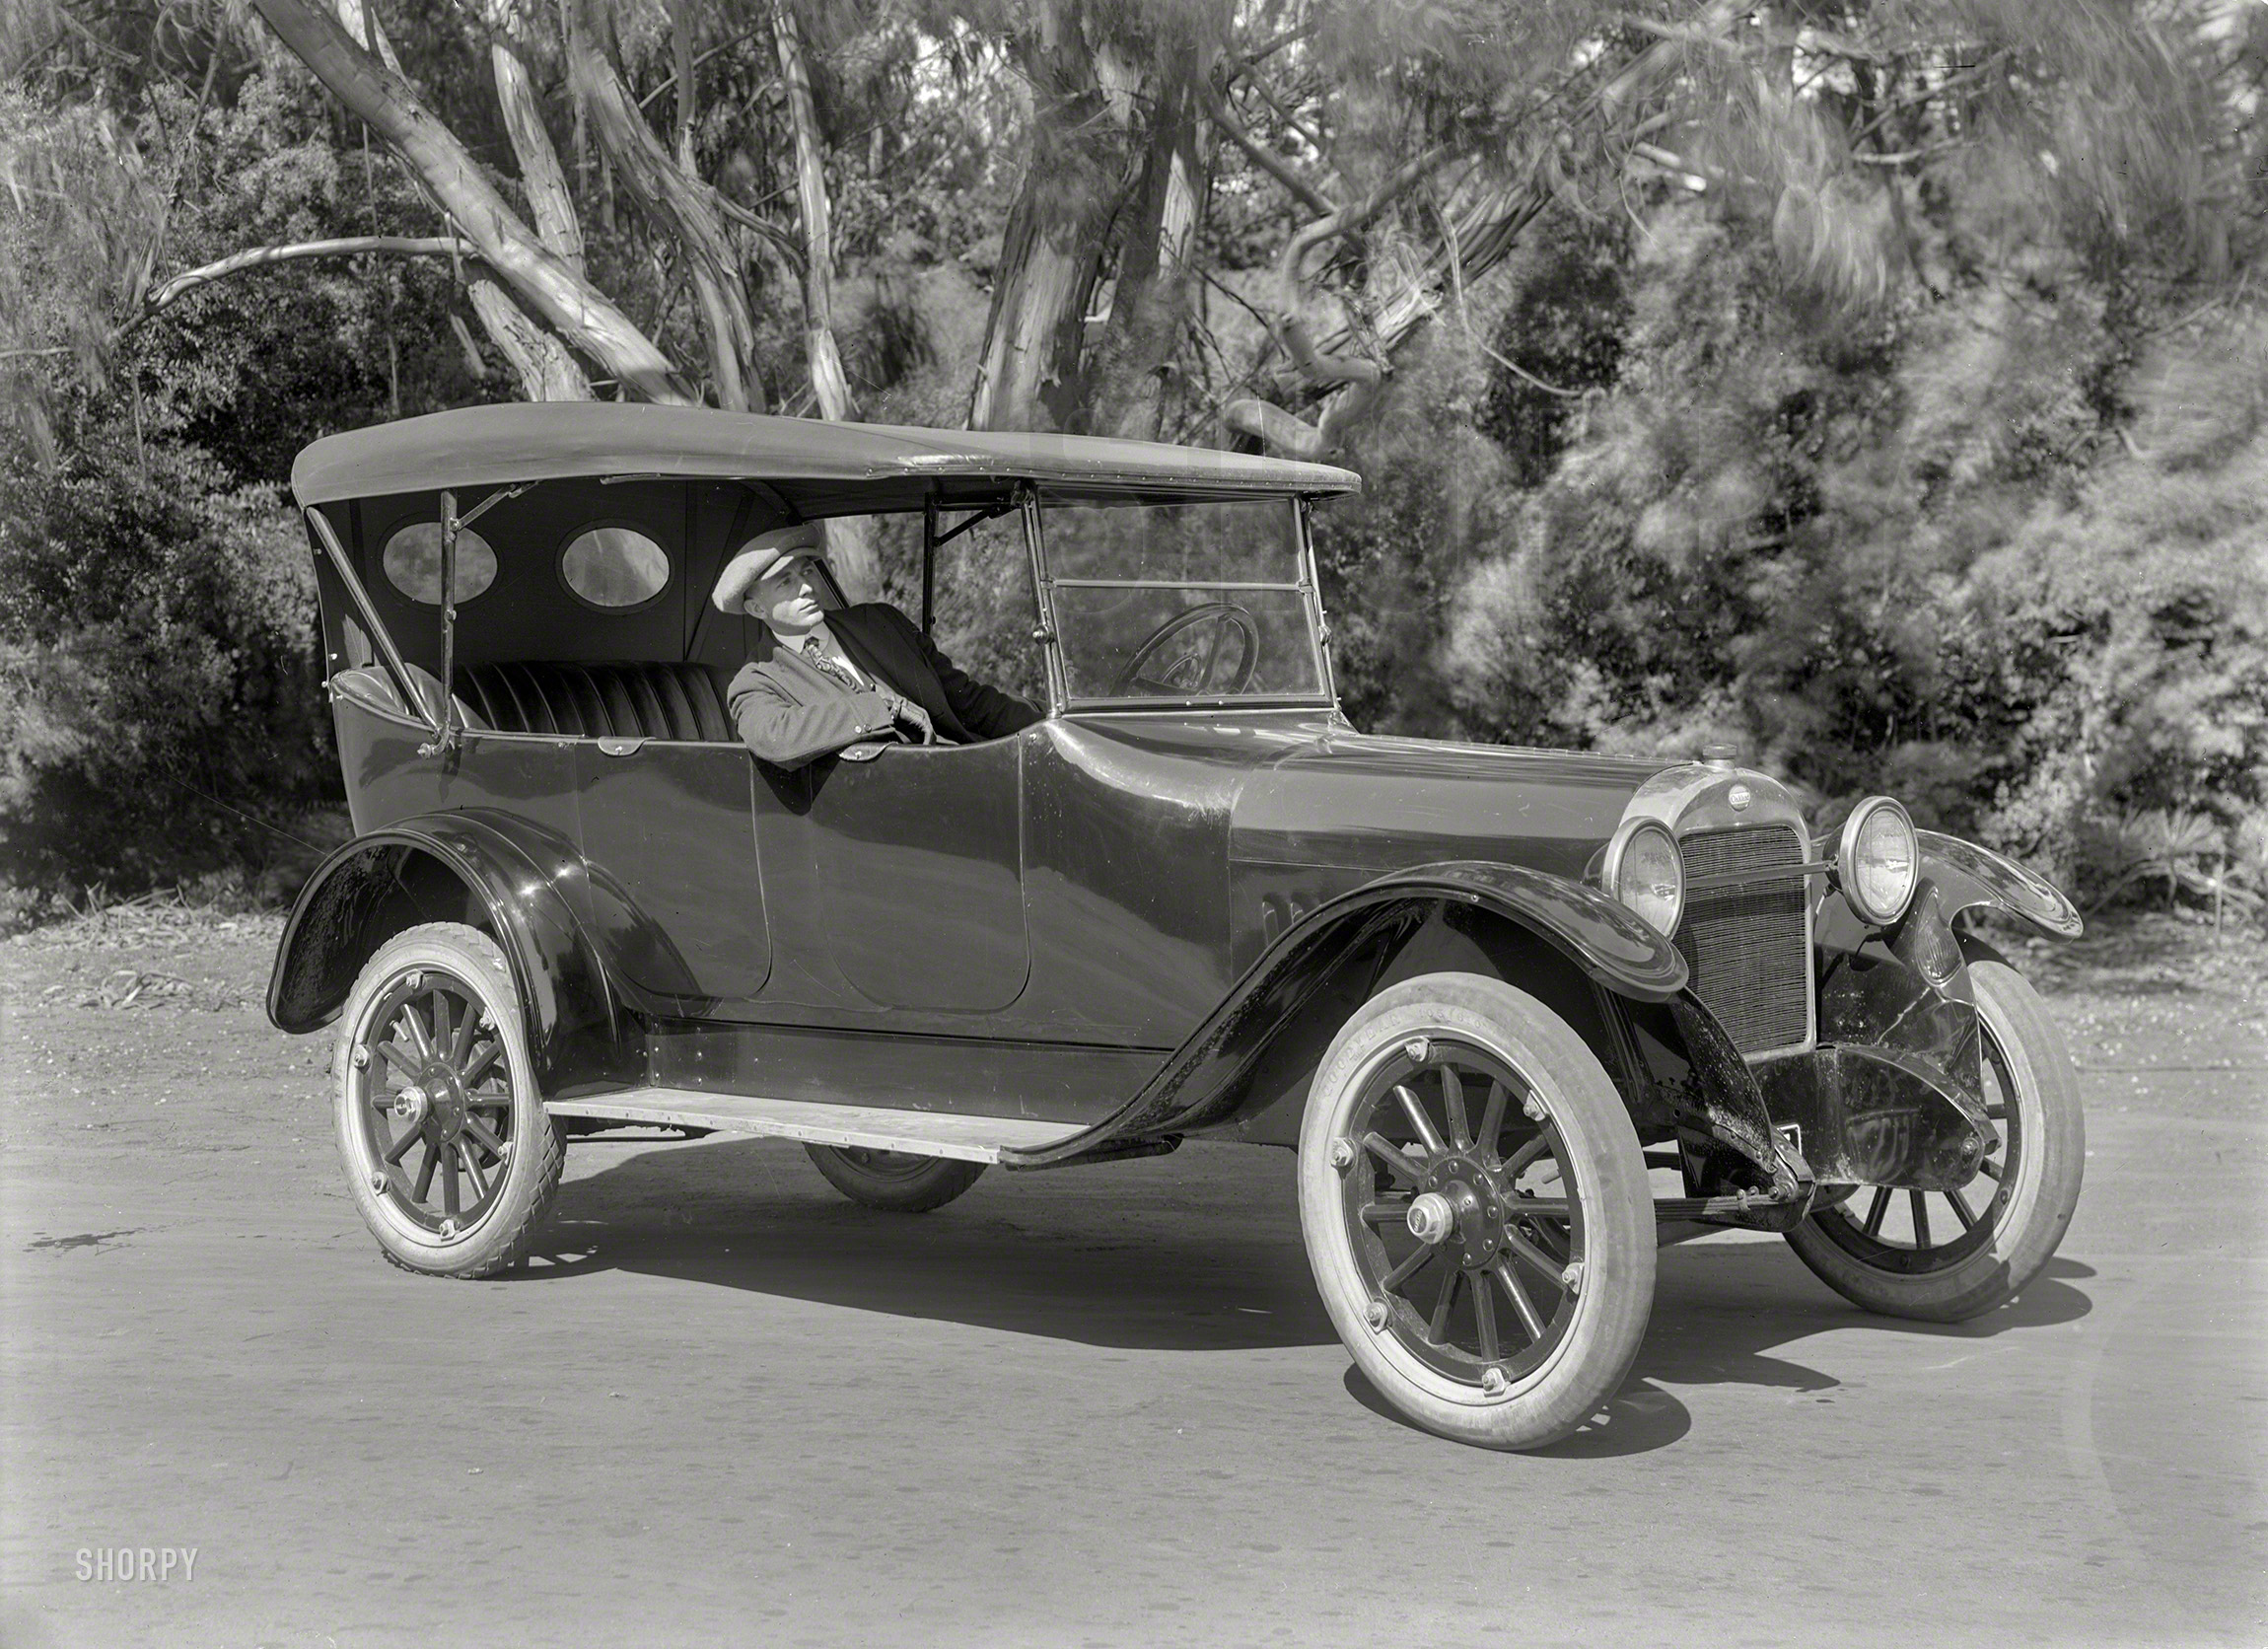 San Francisco circa 1920. "Oakland touring car at Golden Gate Park." Latest entrant in the Shorpy Parade of Prehistoric Phaetons. 5x7 glass negative by Christopher Helin. View full size.